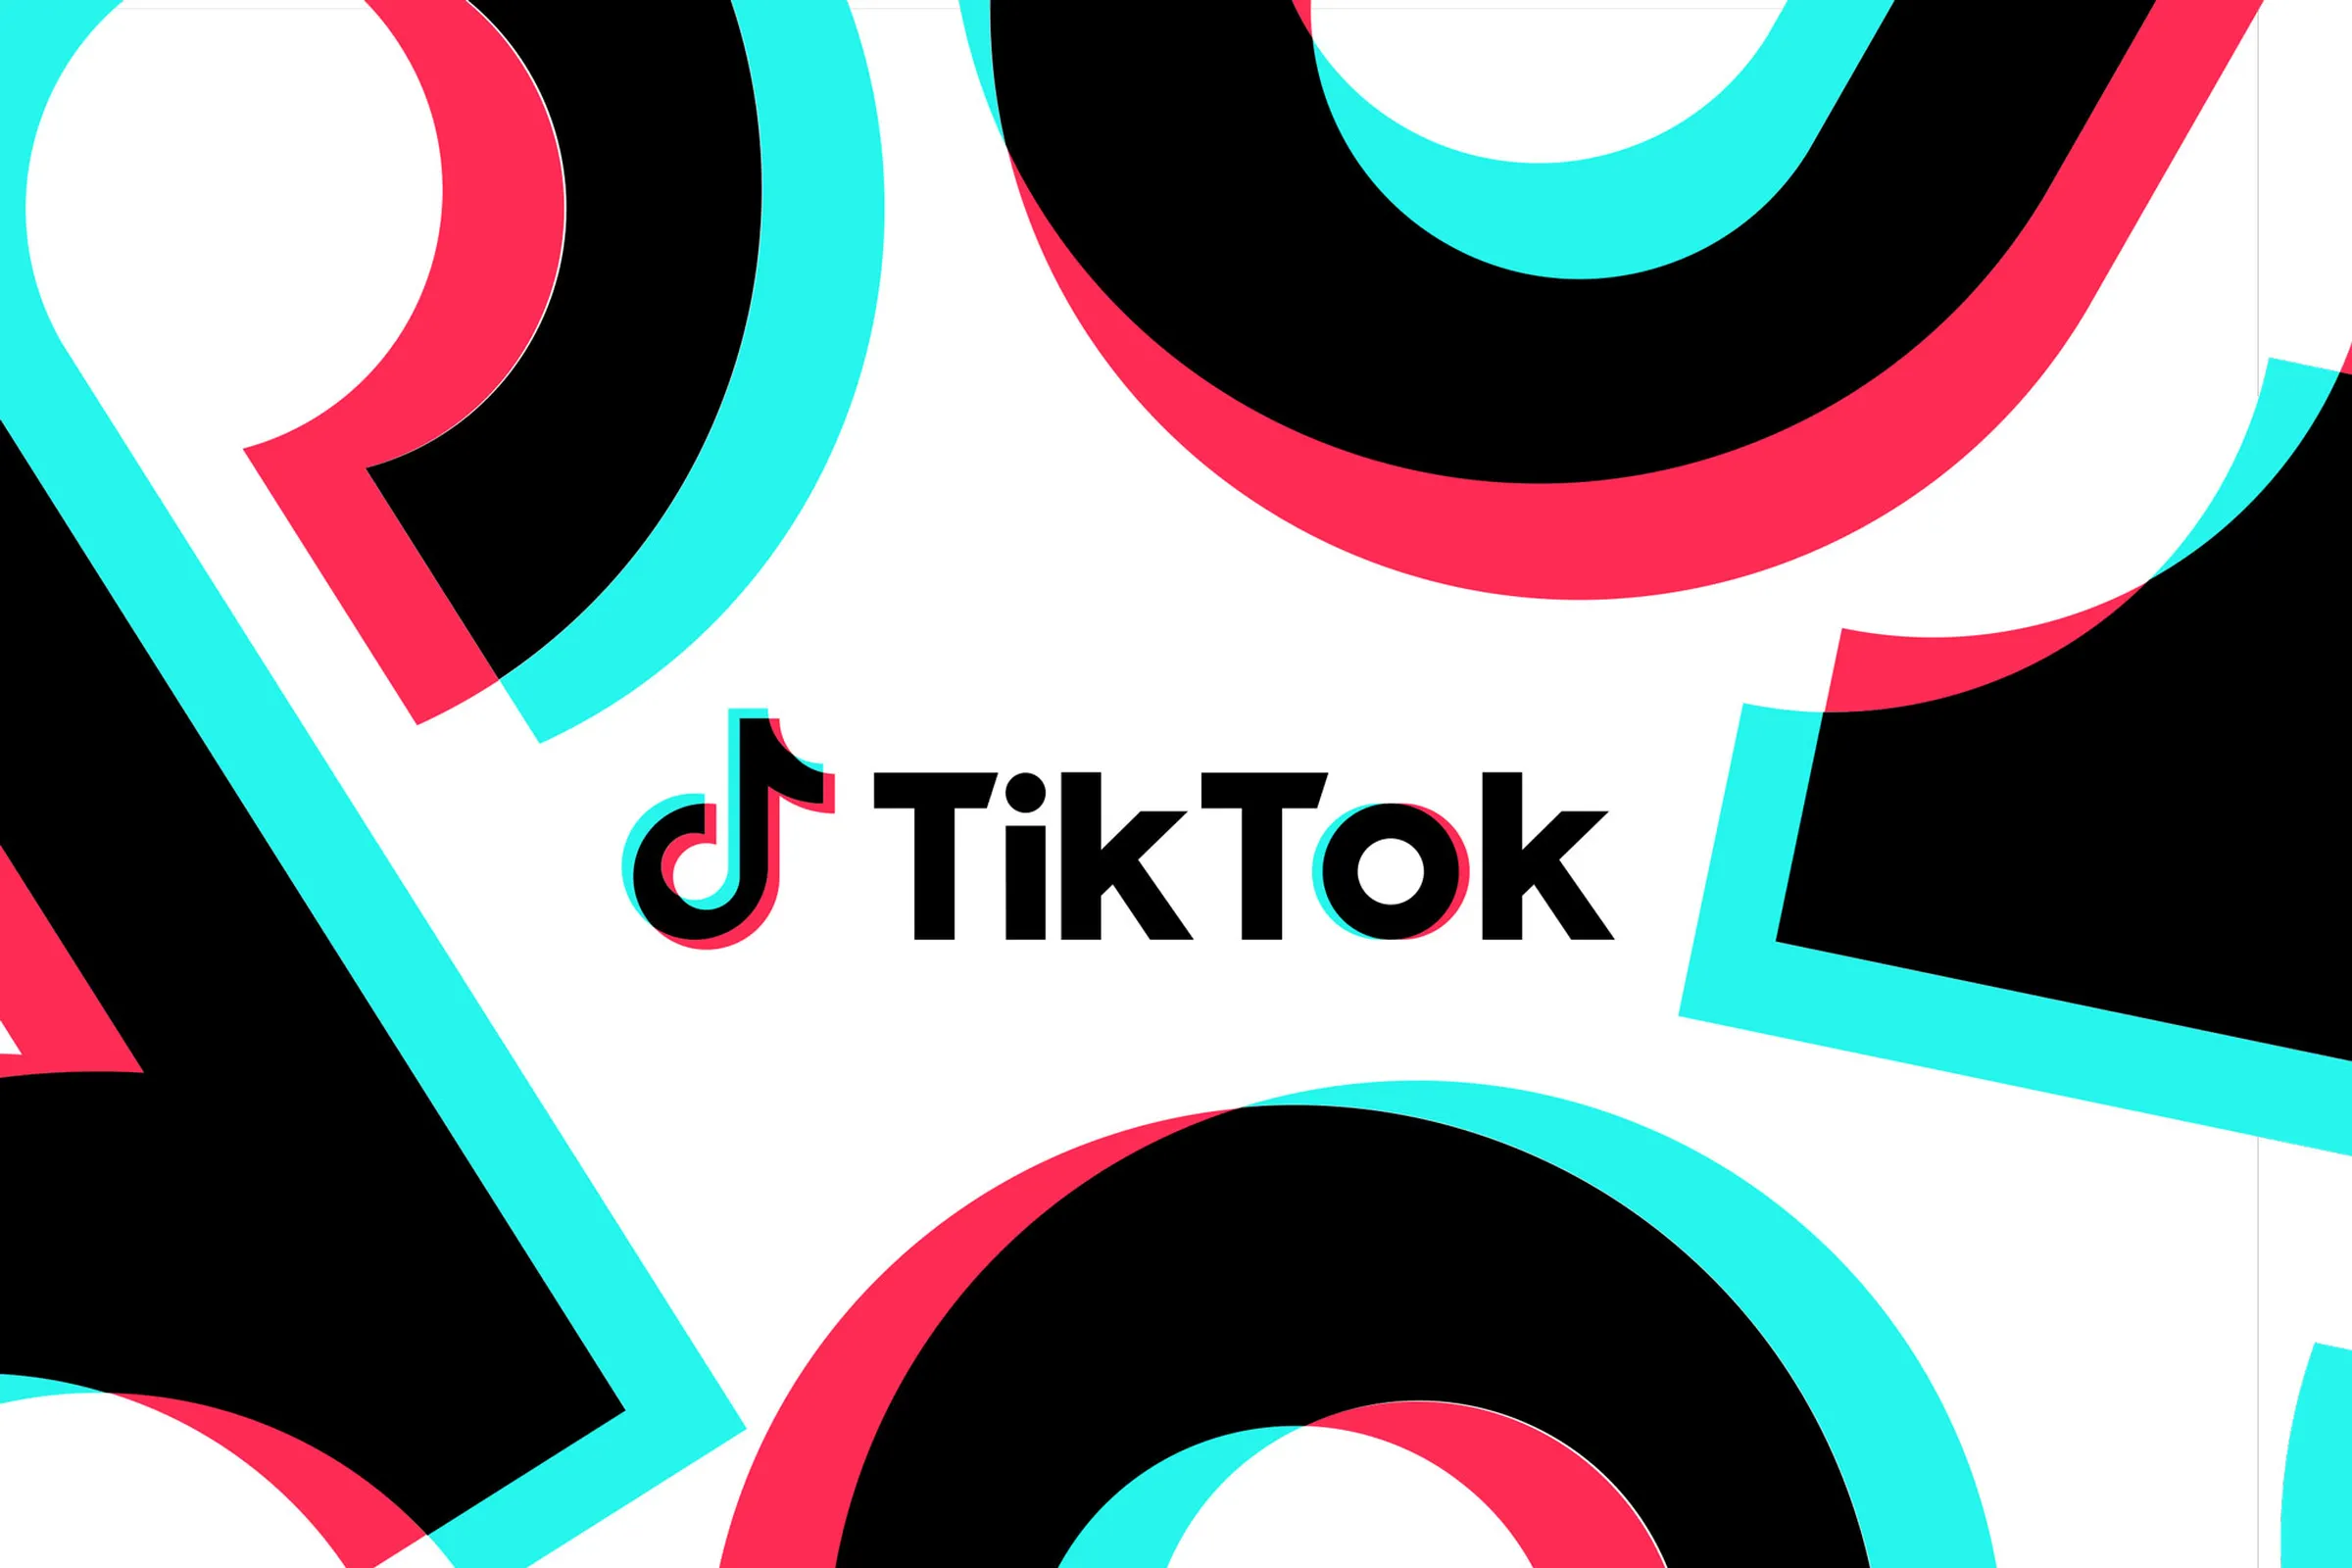 The U.s. House Energy And Commerce Committee Has Made A Unanimous Decision, With A 50-0 Vote, Mandating Bytedance To Sell Tiktok Within 165 Days To Prevent Its Ban.